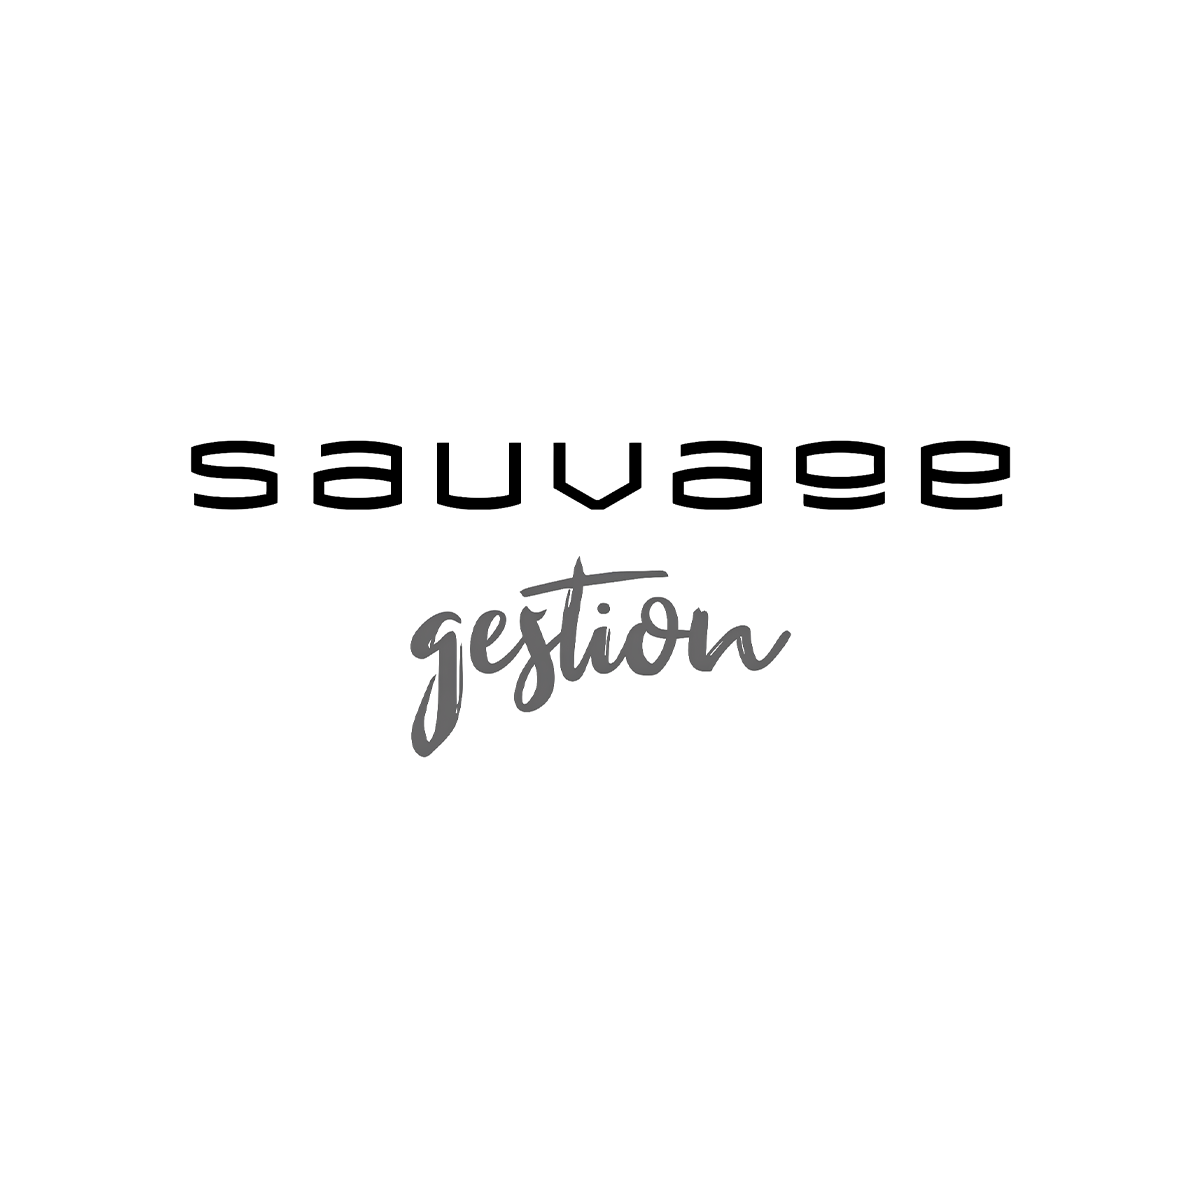 Sauvage Immobilier